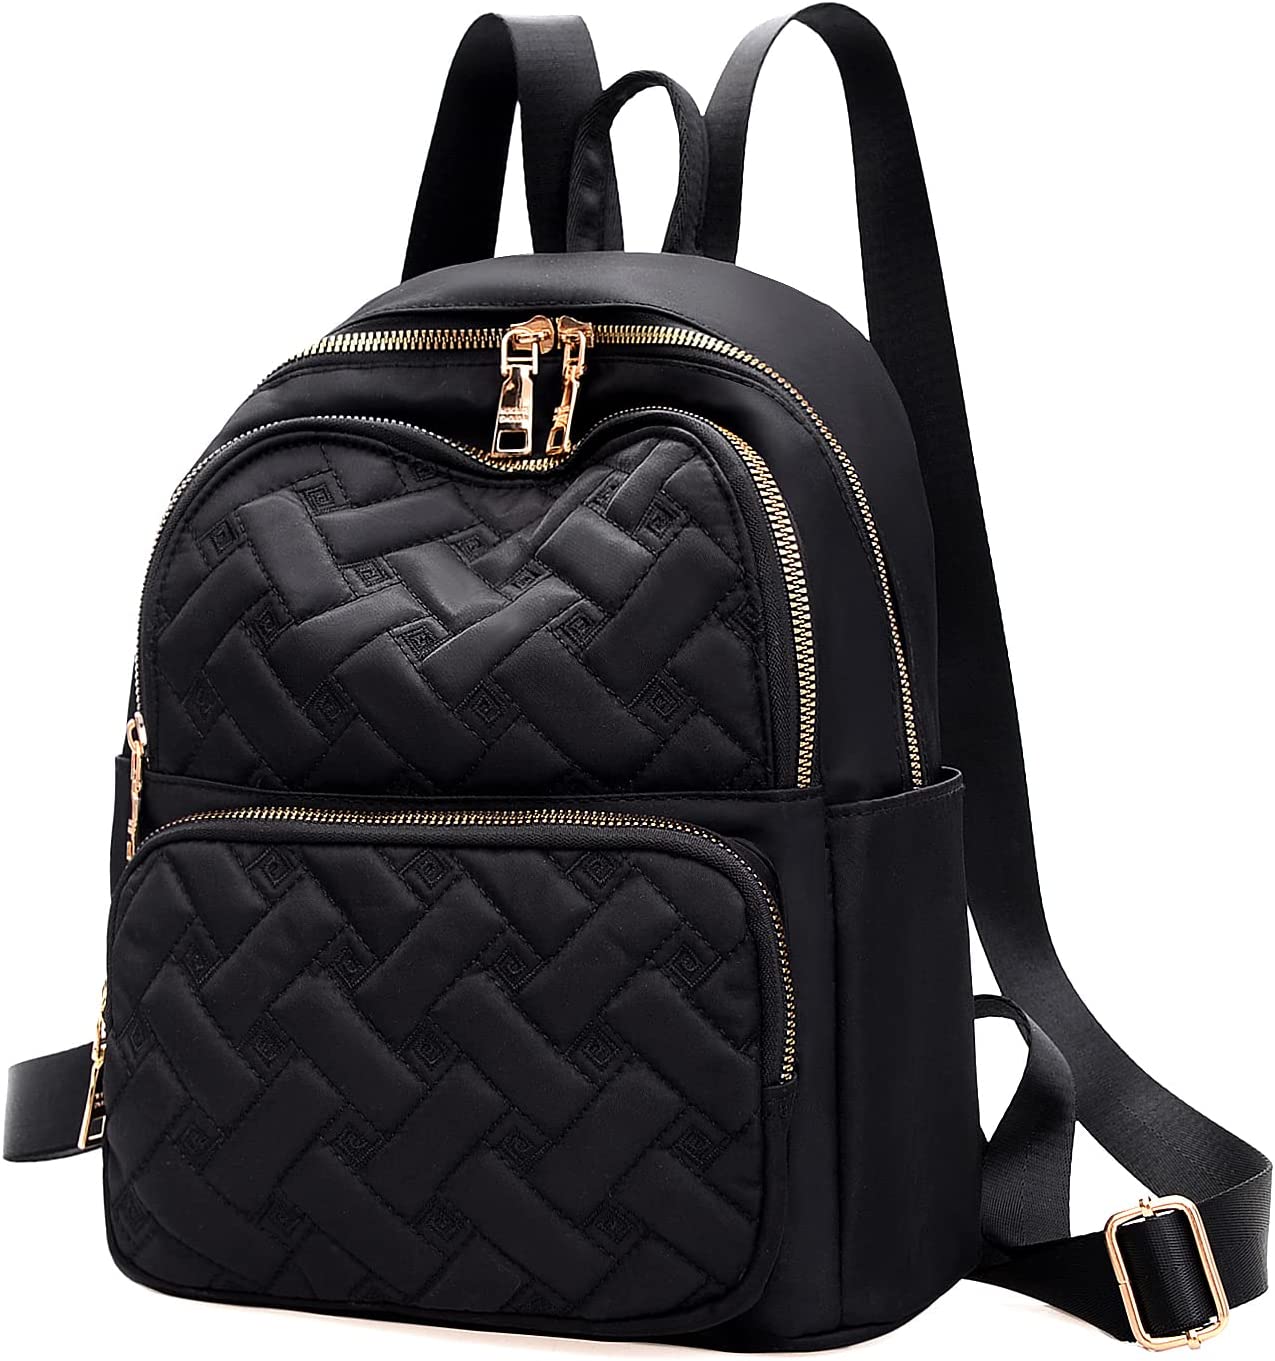 Backpack for Women, Nylon Travel Backpack Purse Black Small School Bag for Girls (Square Quilited) - image 3 of 7